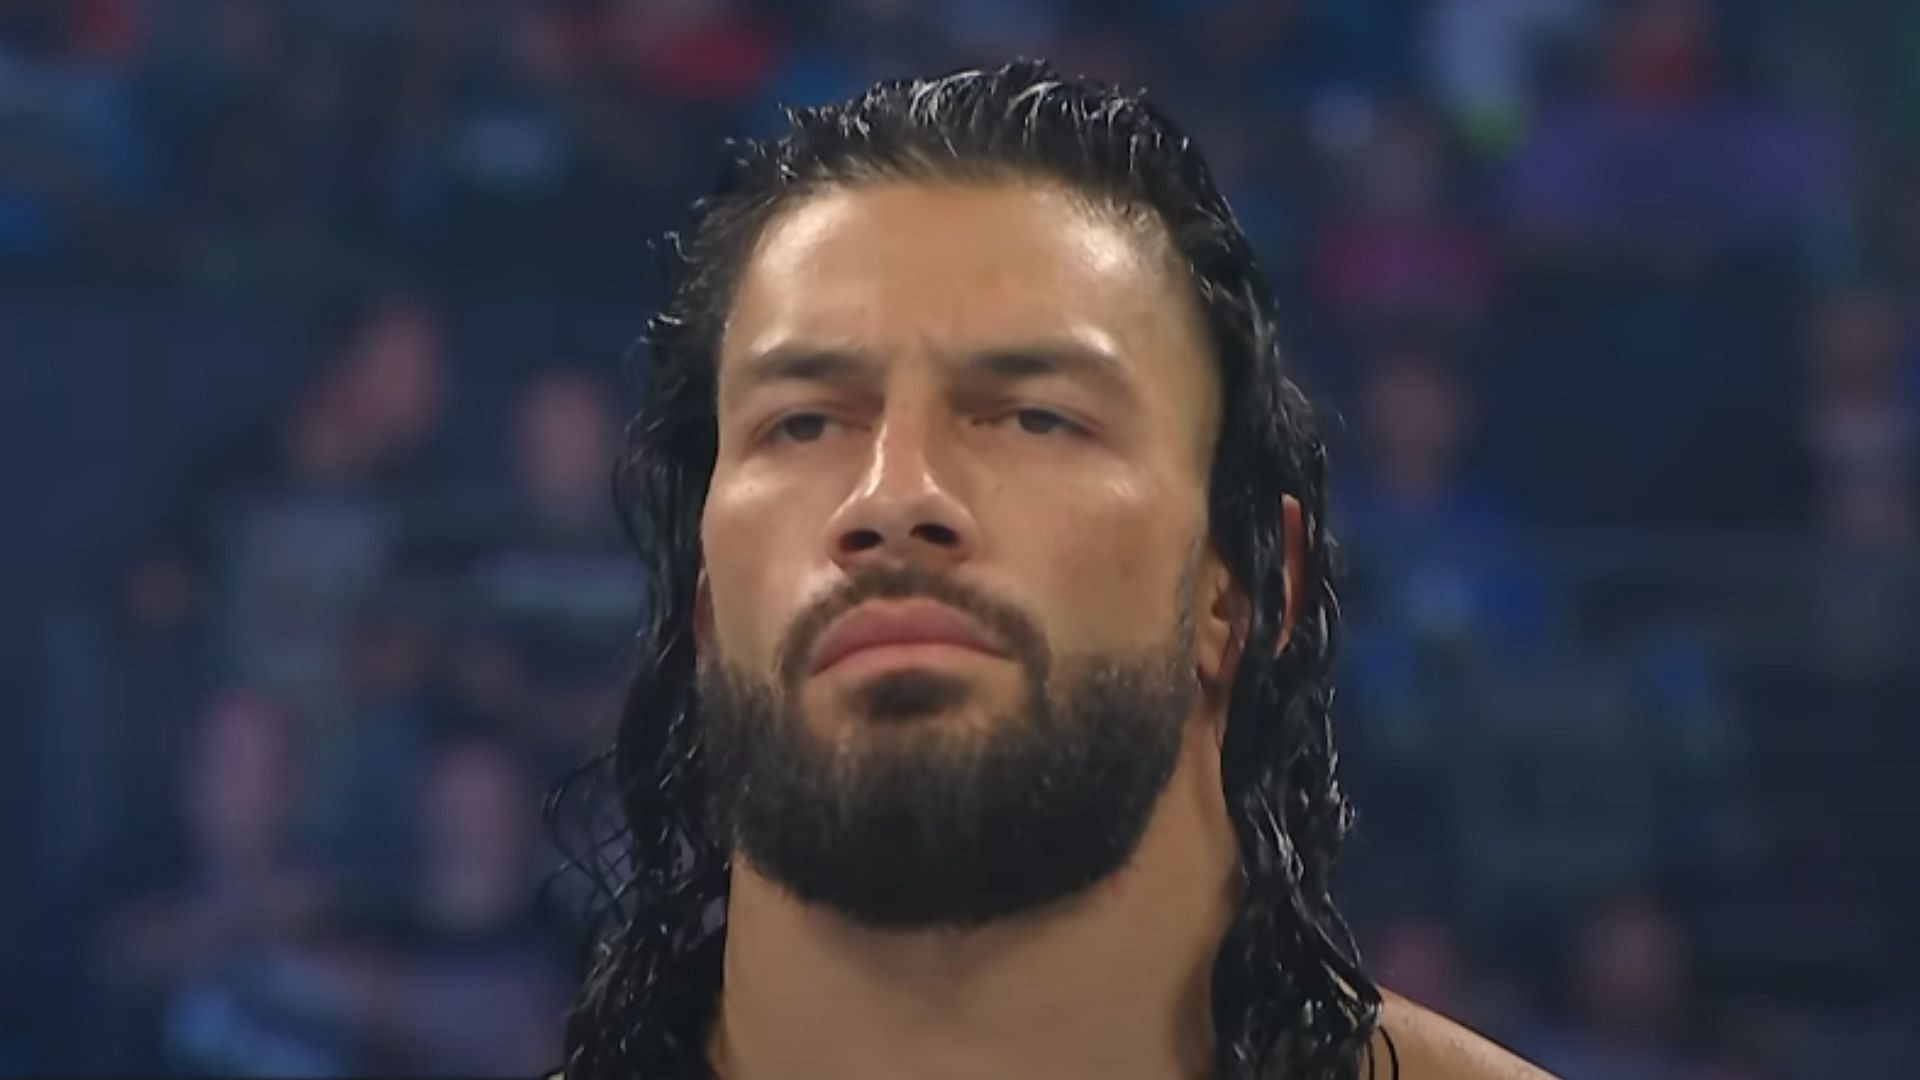 Roman Reigns is the leader of The Bloodline.